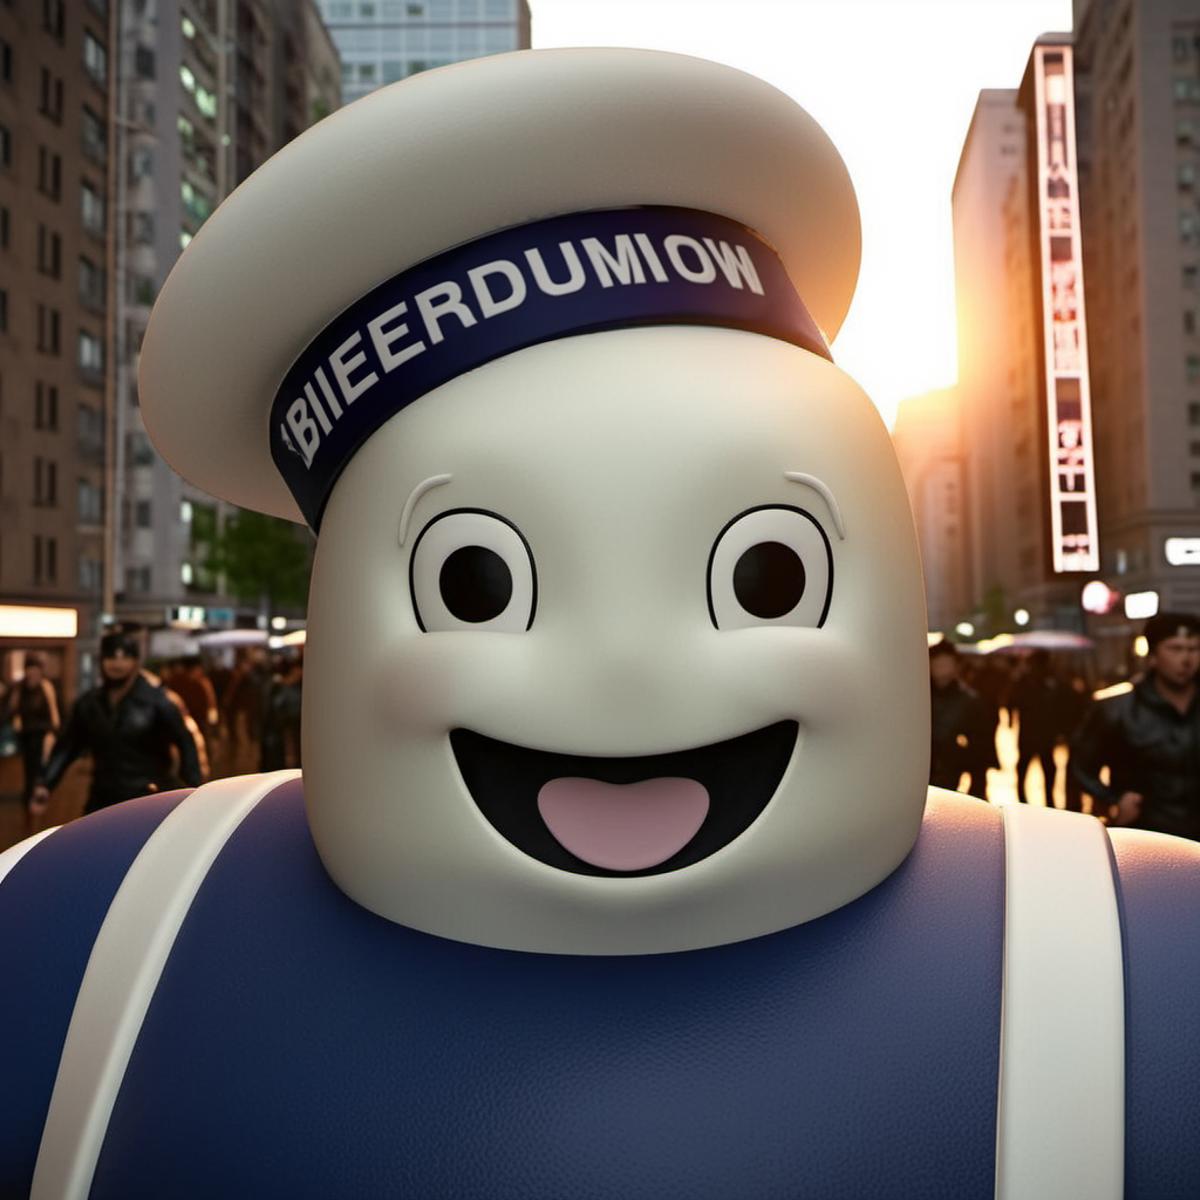 The Stay-Puft Marshmallow Man - Ghostbusters - SDXL image by PhotobAIt